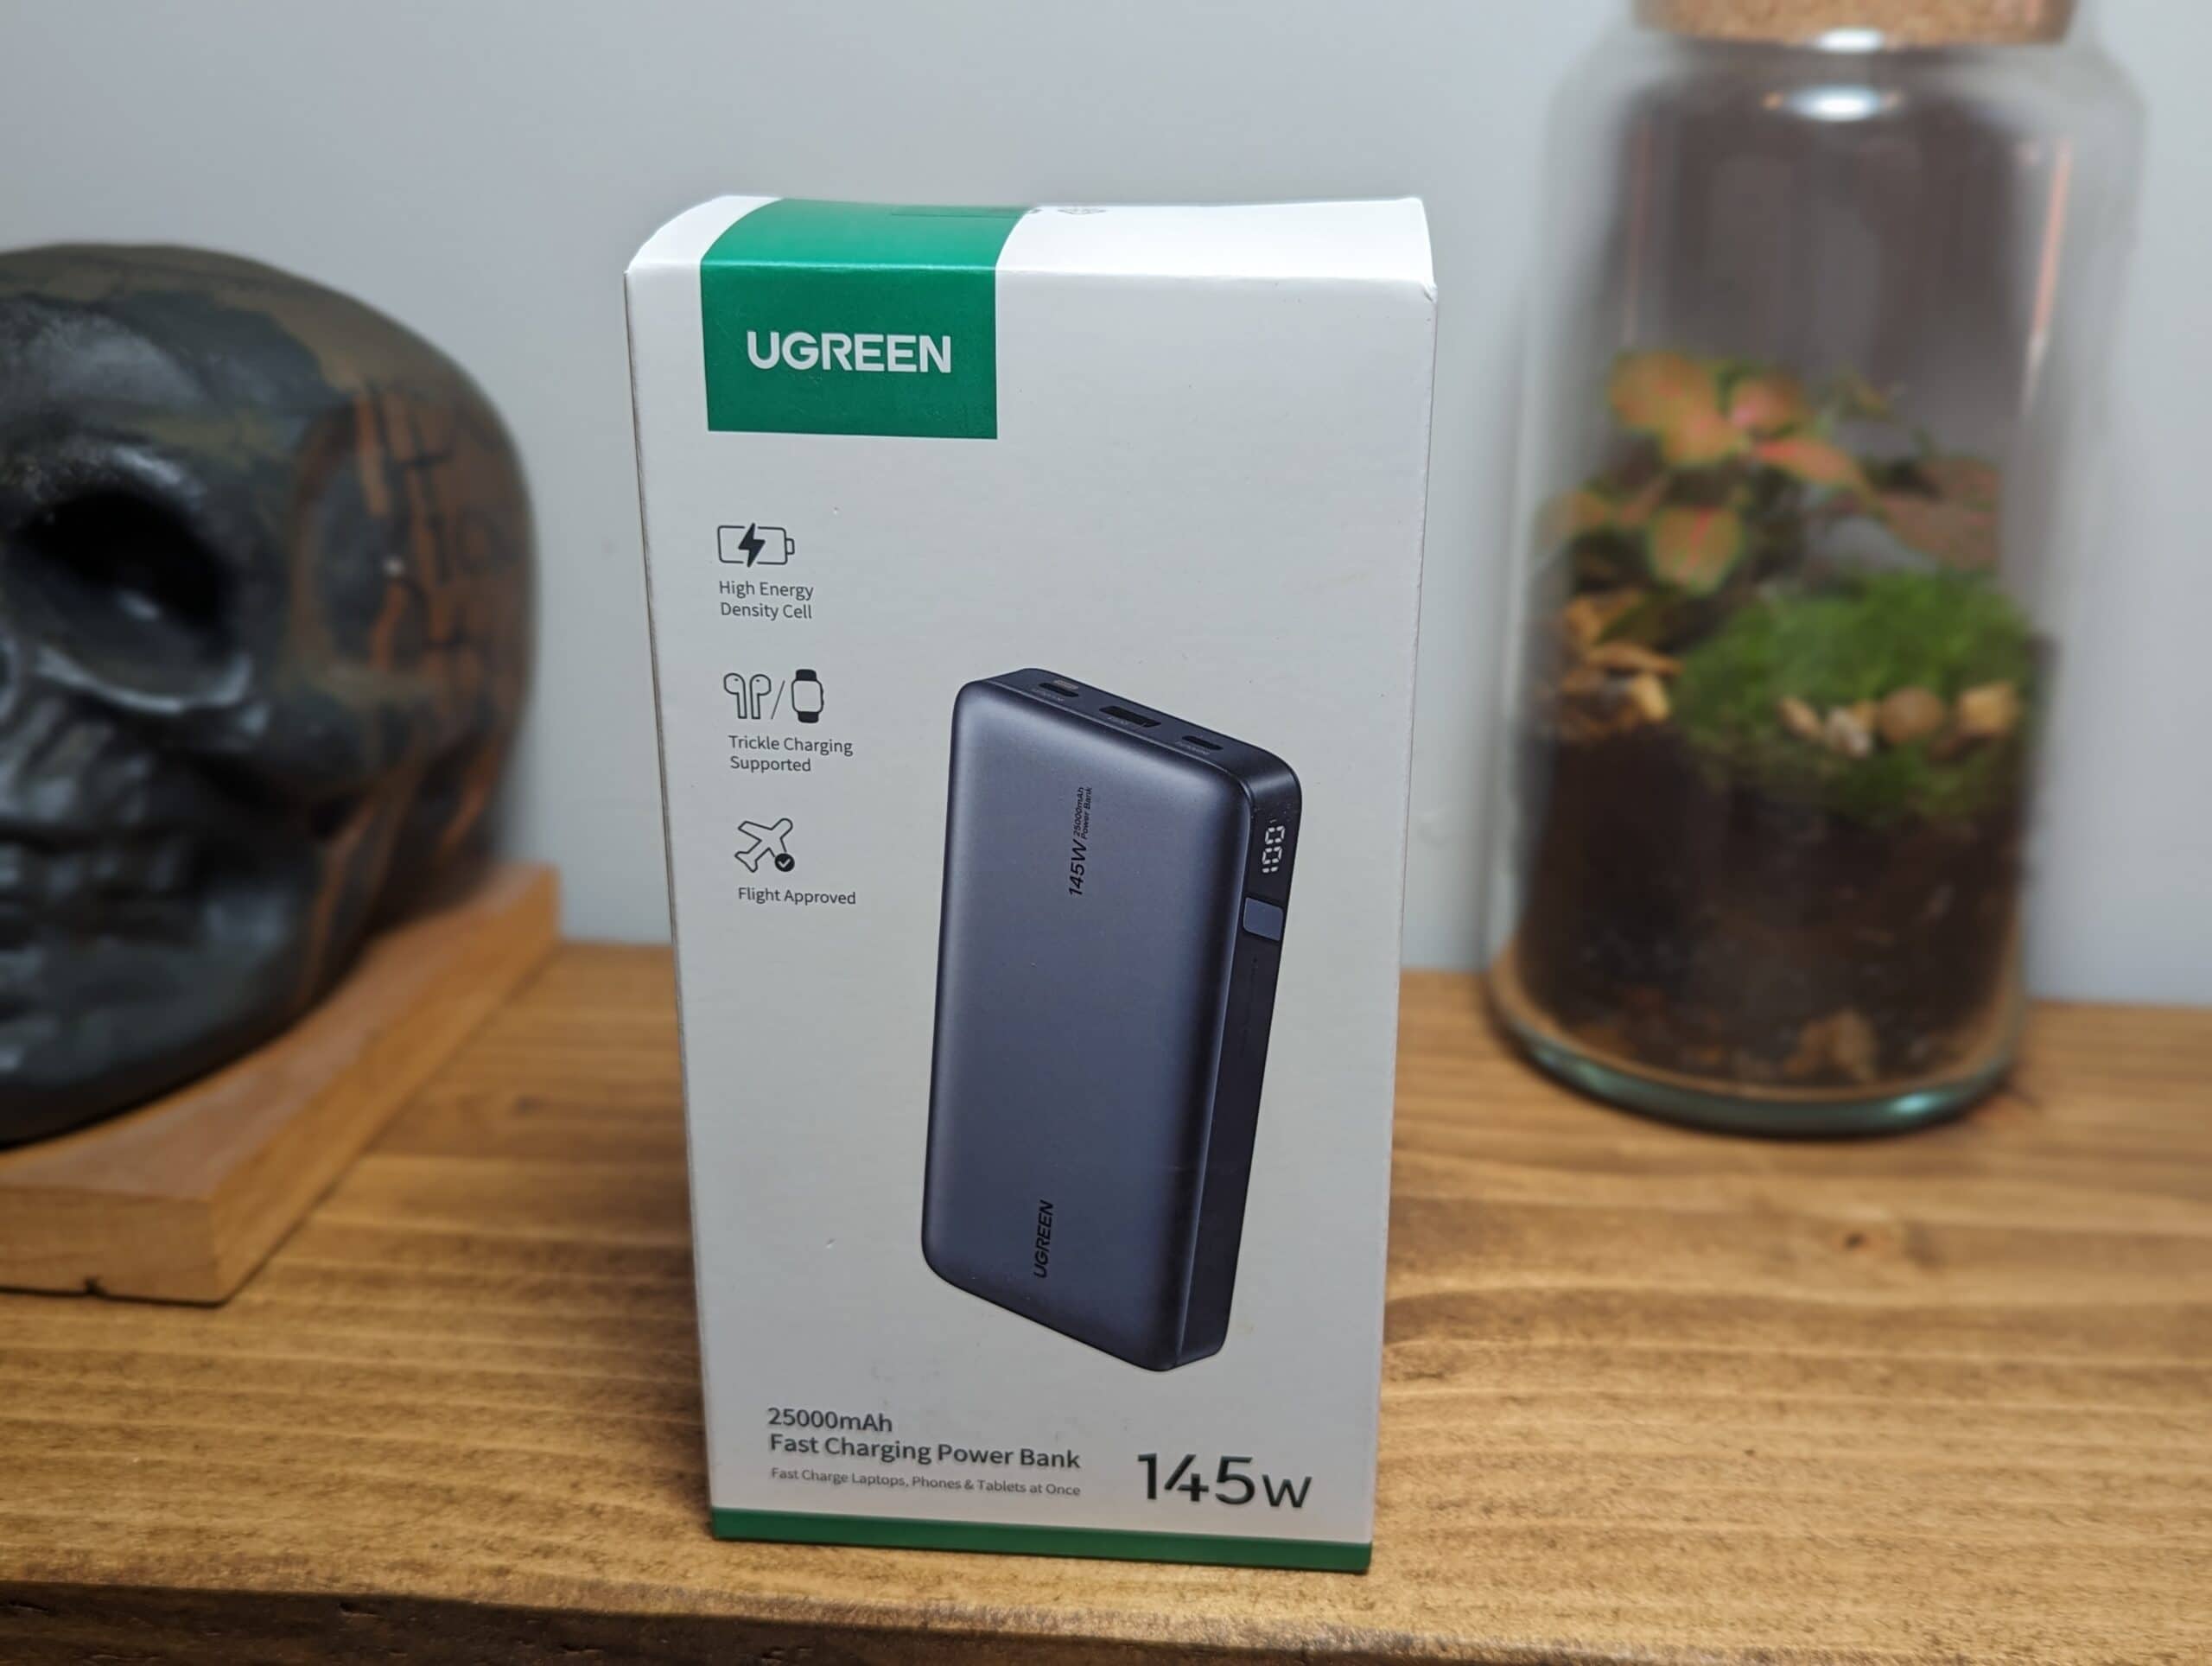 UGREEN 145W Power Bank UK and US pricing revealed -  News